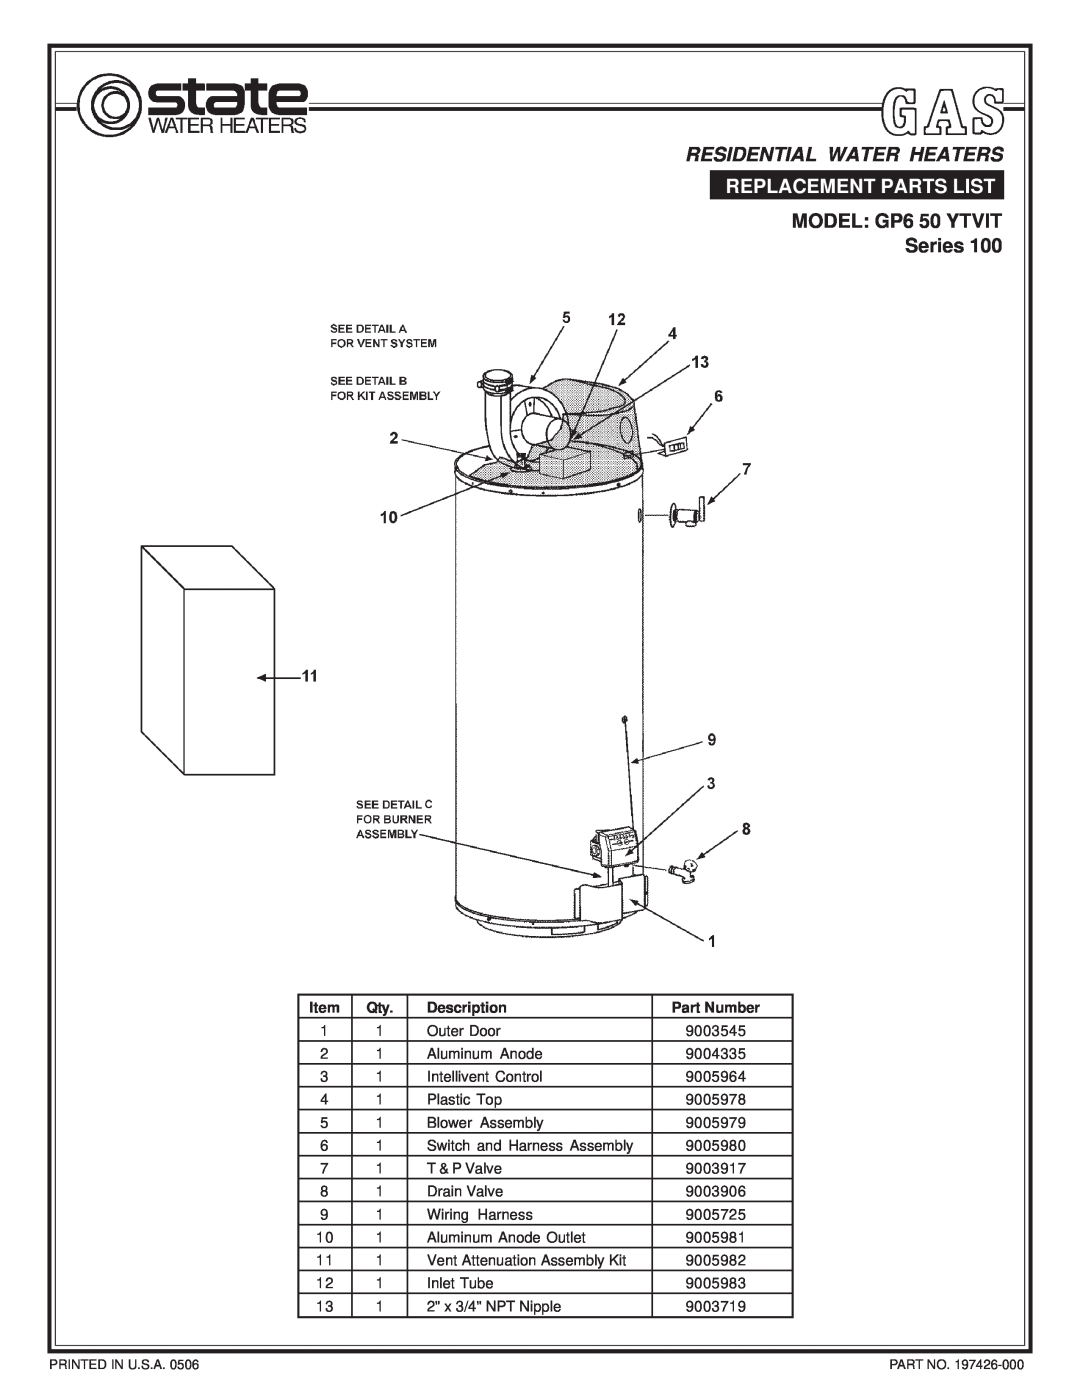 State Industries manual MODEL GP6 50 YTVIT Series, Description, Part Number, Residential Water Heaters 